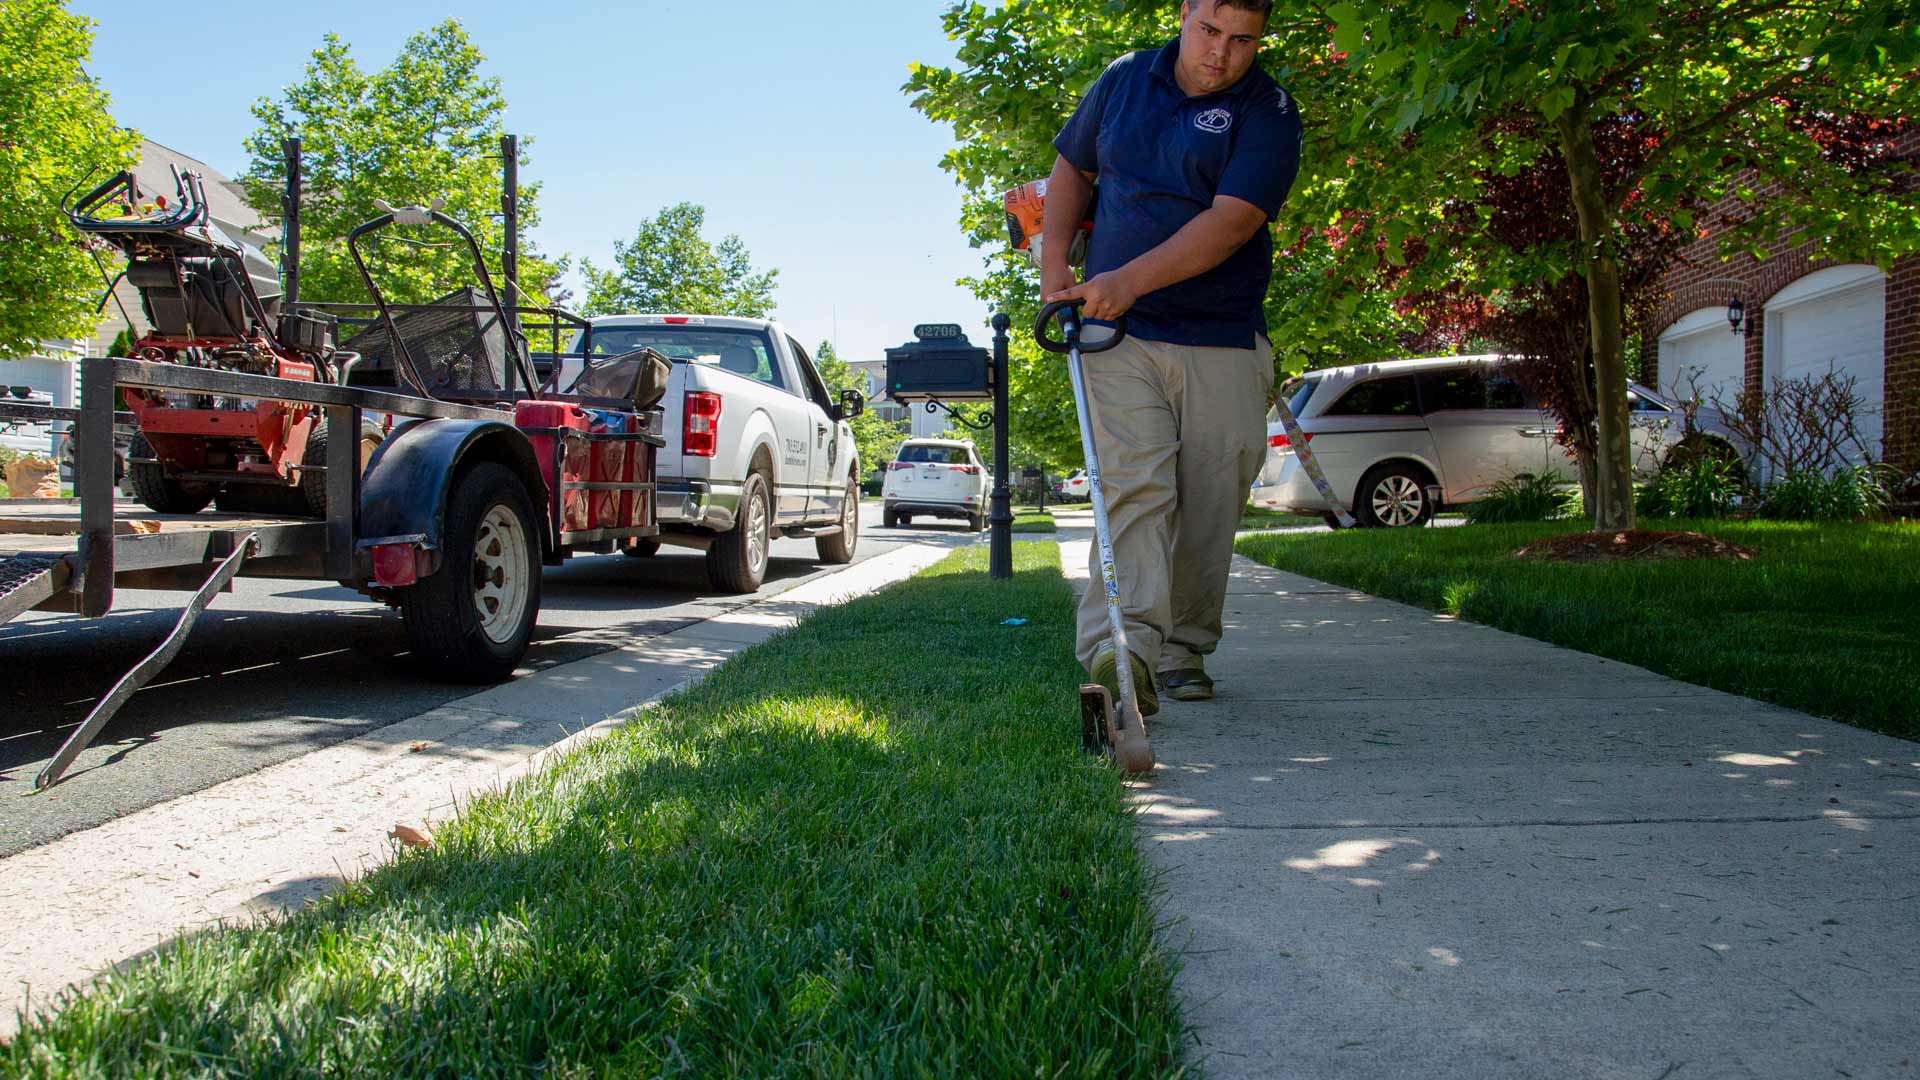 Professional edging a lawn by the sidewalk with a company trialer in the background.